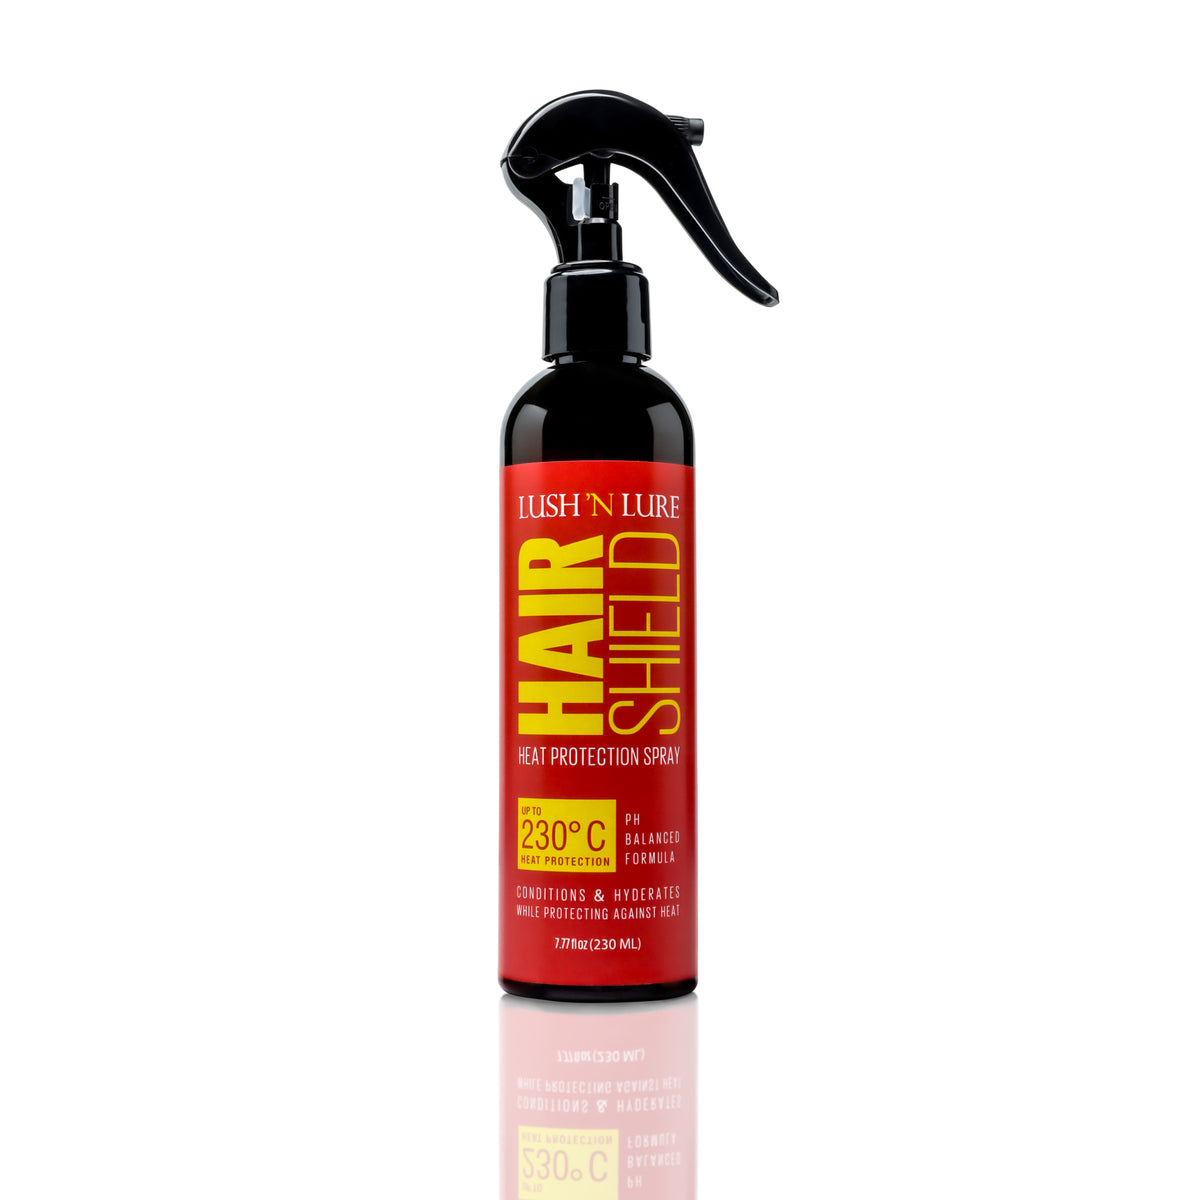 Image showing LUSH 'N LURE Heat Protection Spray, a specialized formula designed to shield hair from heat damage during styling